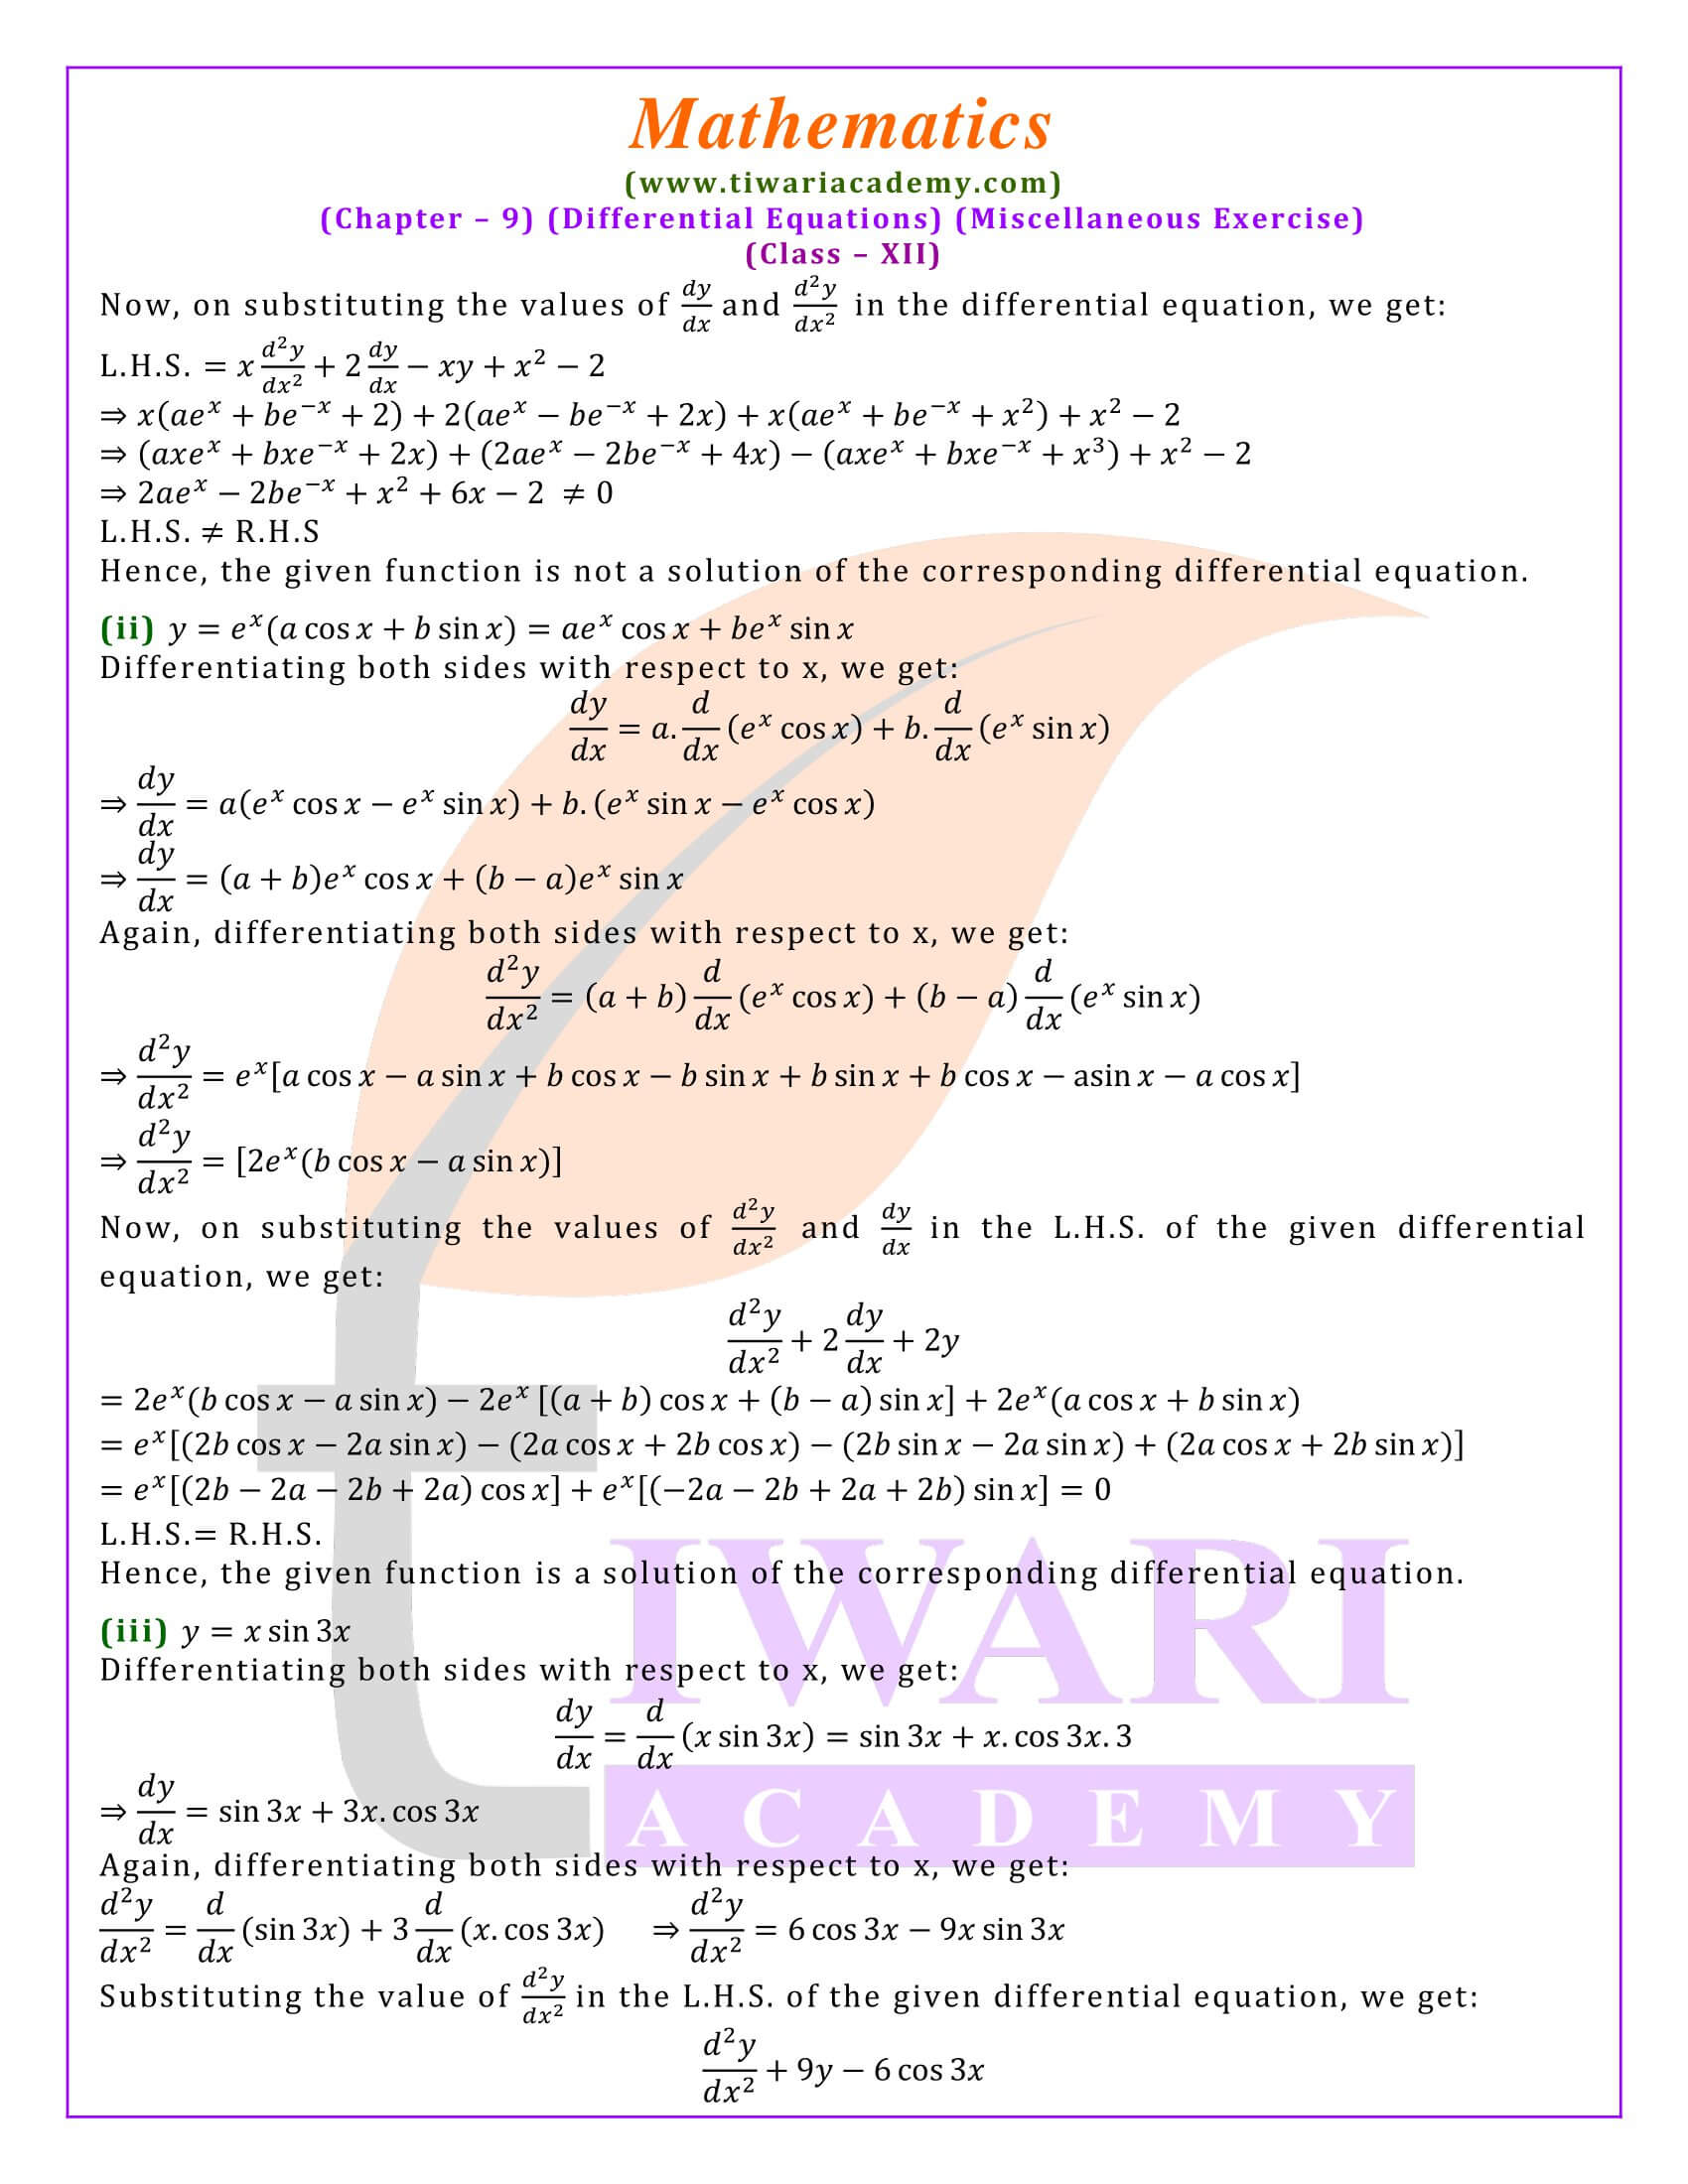 NCERT Solutions for Class 12 Maths Chapter 9 Miscellaneous Exercise